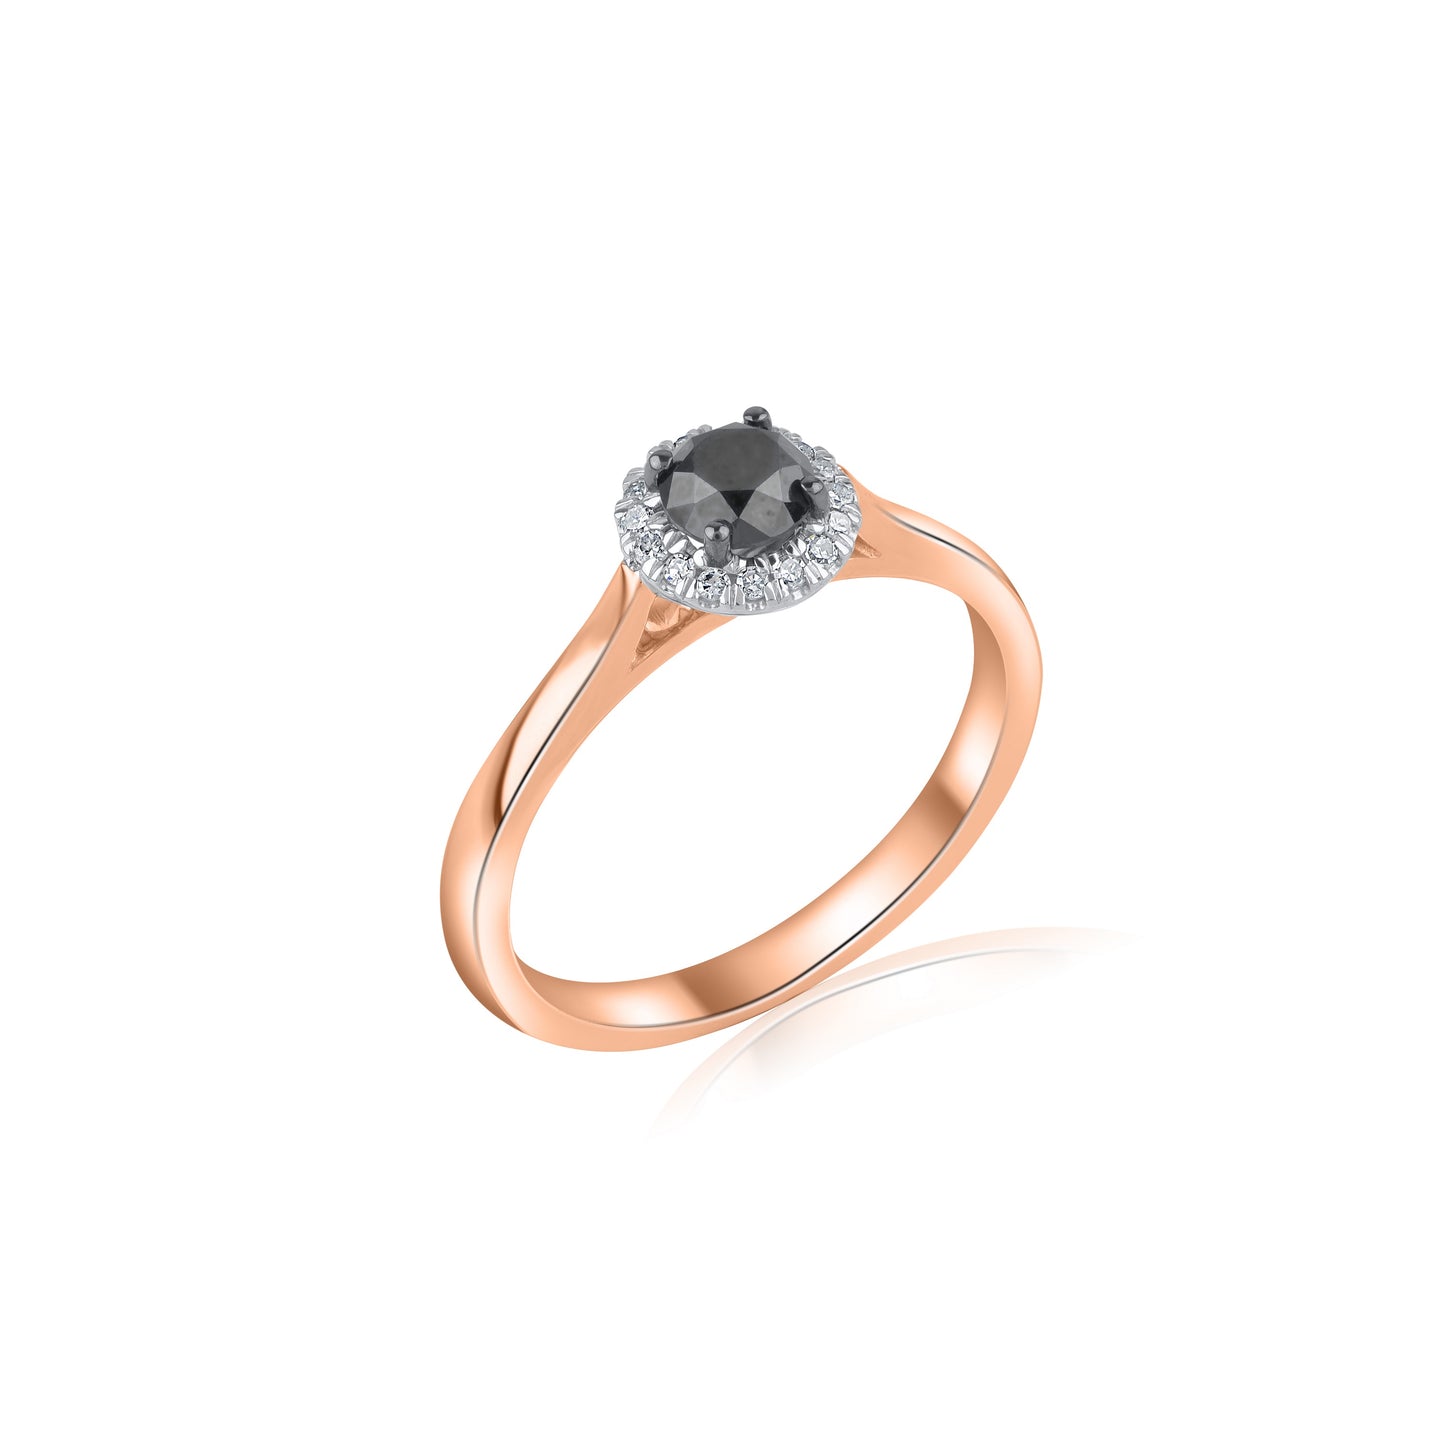 Black Diamond Solitaire Engagement Ring in 10K Gold